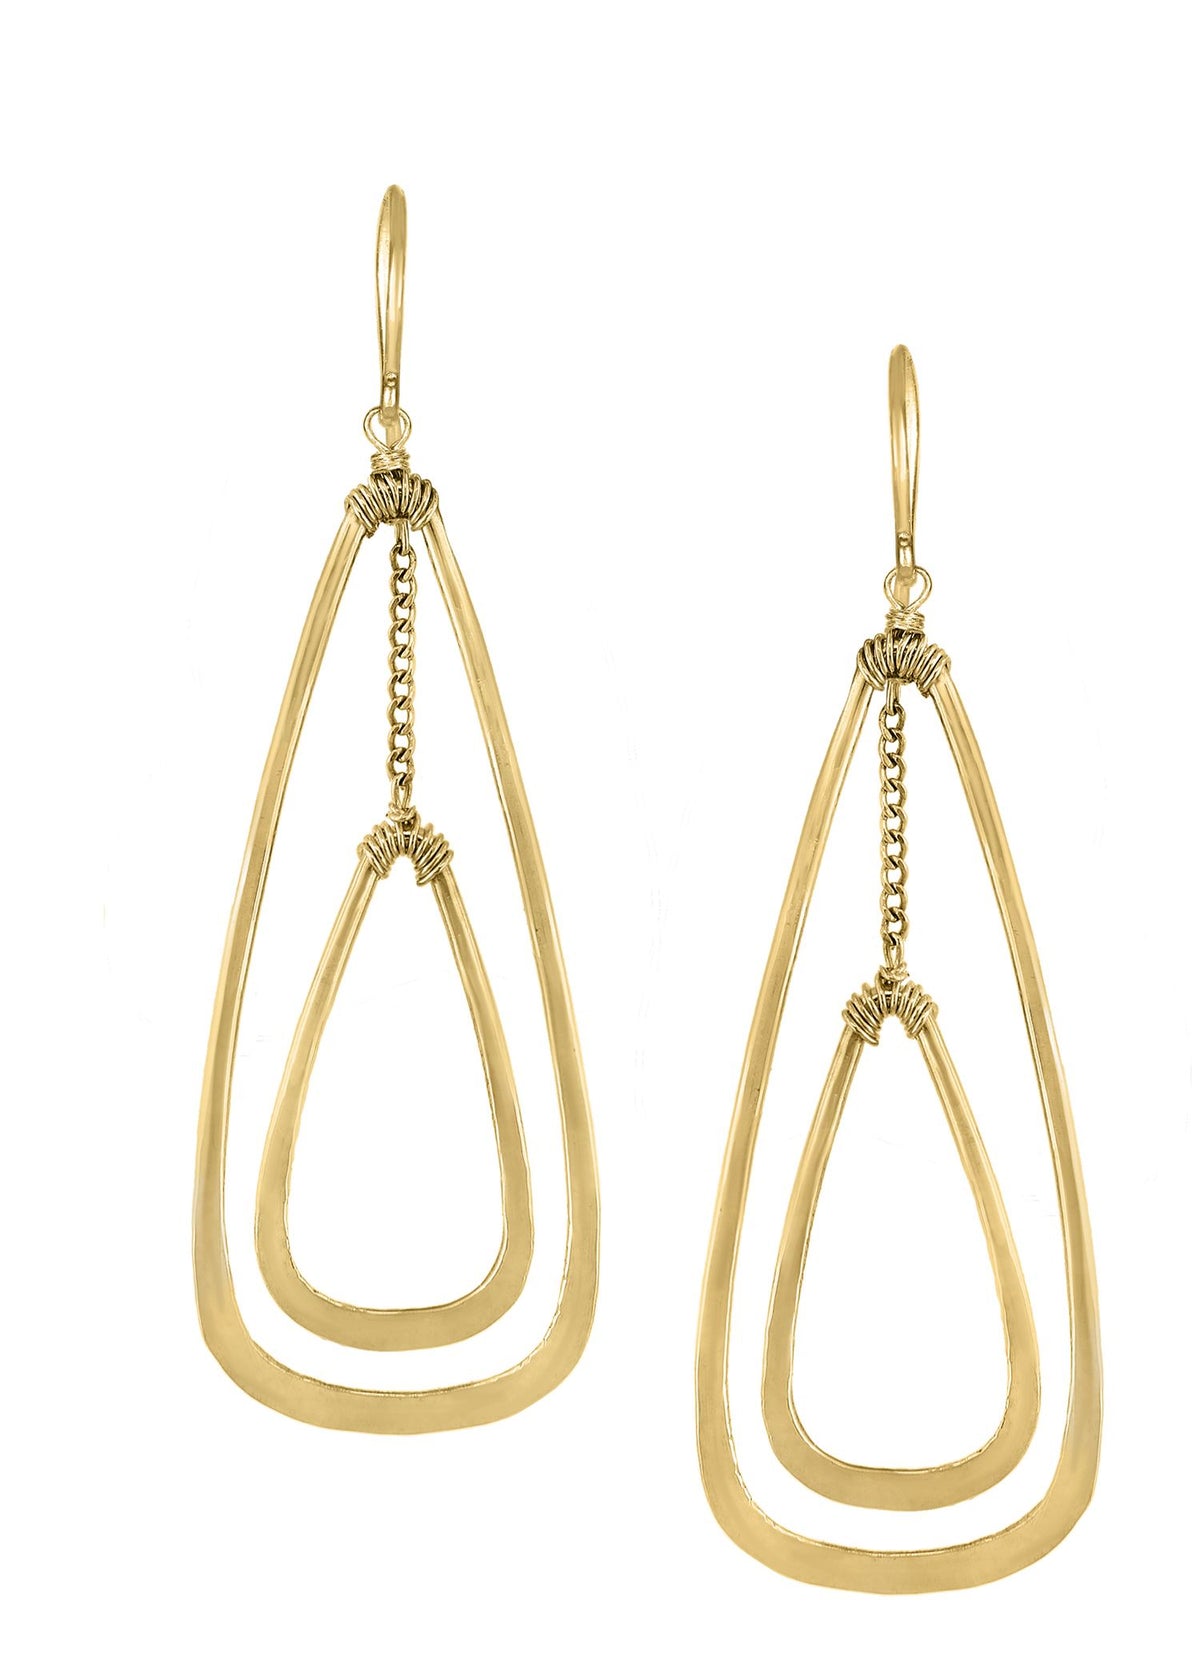 14k gold fill Earrings measure 2-1/4&quot; in length (including the levers) and 5/8&quot; in width Handmade in our Los Angeles studio